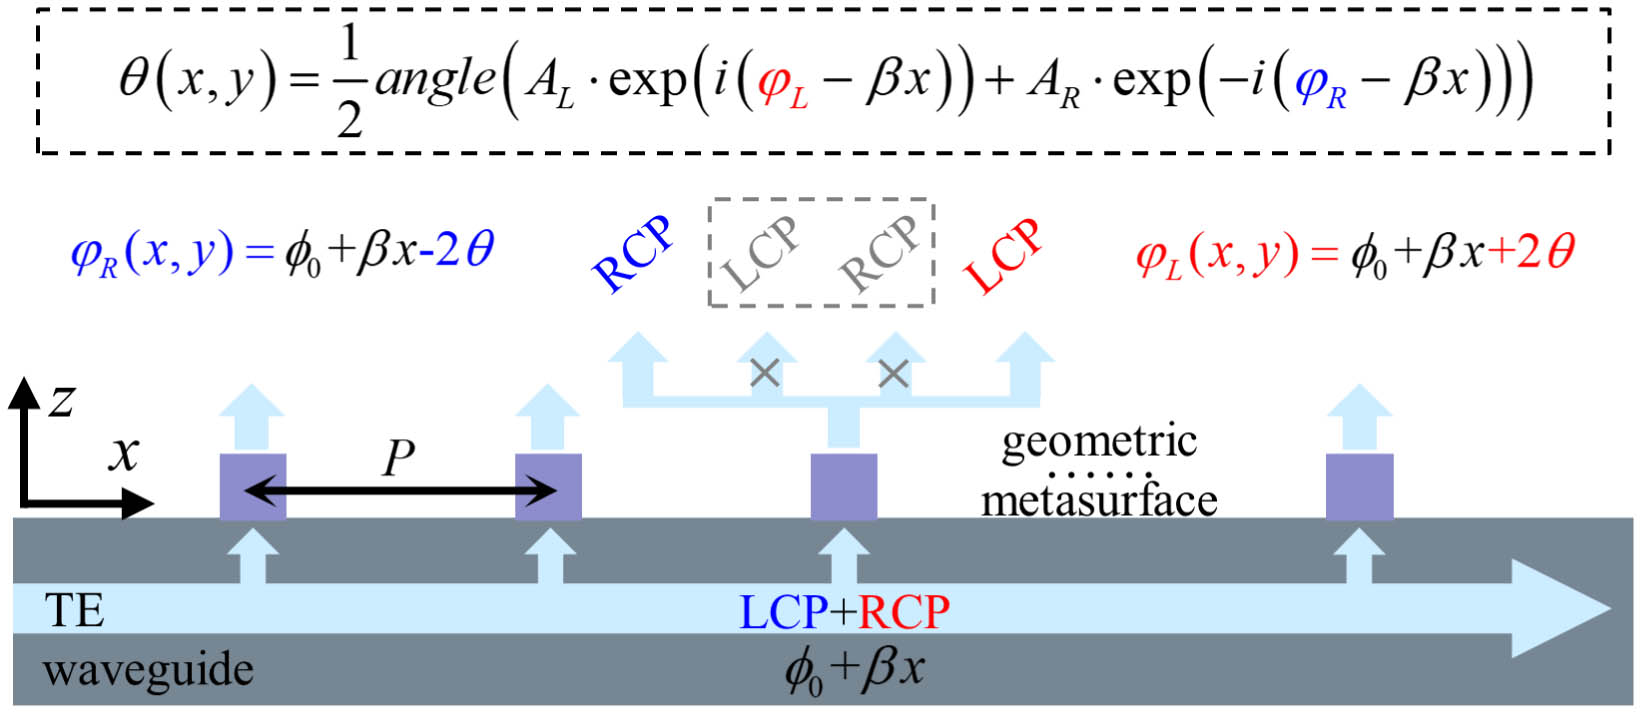 Illustration of the working principle of the spin-decoupled geometric meta-coupler excited by the TE guided mode. The traveling TE mode can be decomposed into the combination of LCP and RCP waves, respectively, both of which are coupled out and independently manipulated by the elaborately designed geometric metasurface with different phase profiles for function multiplexing.